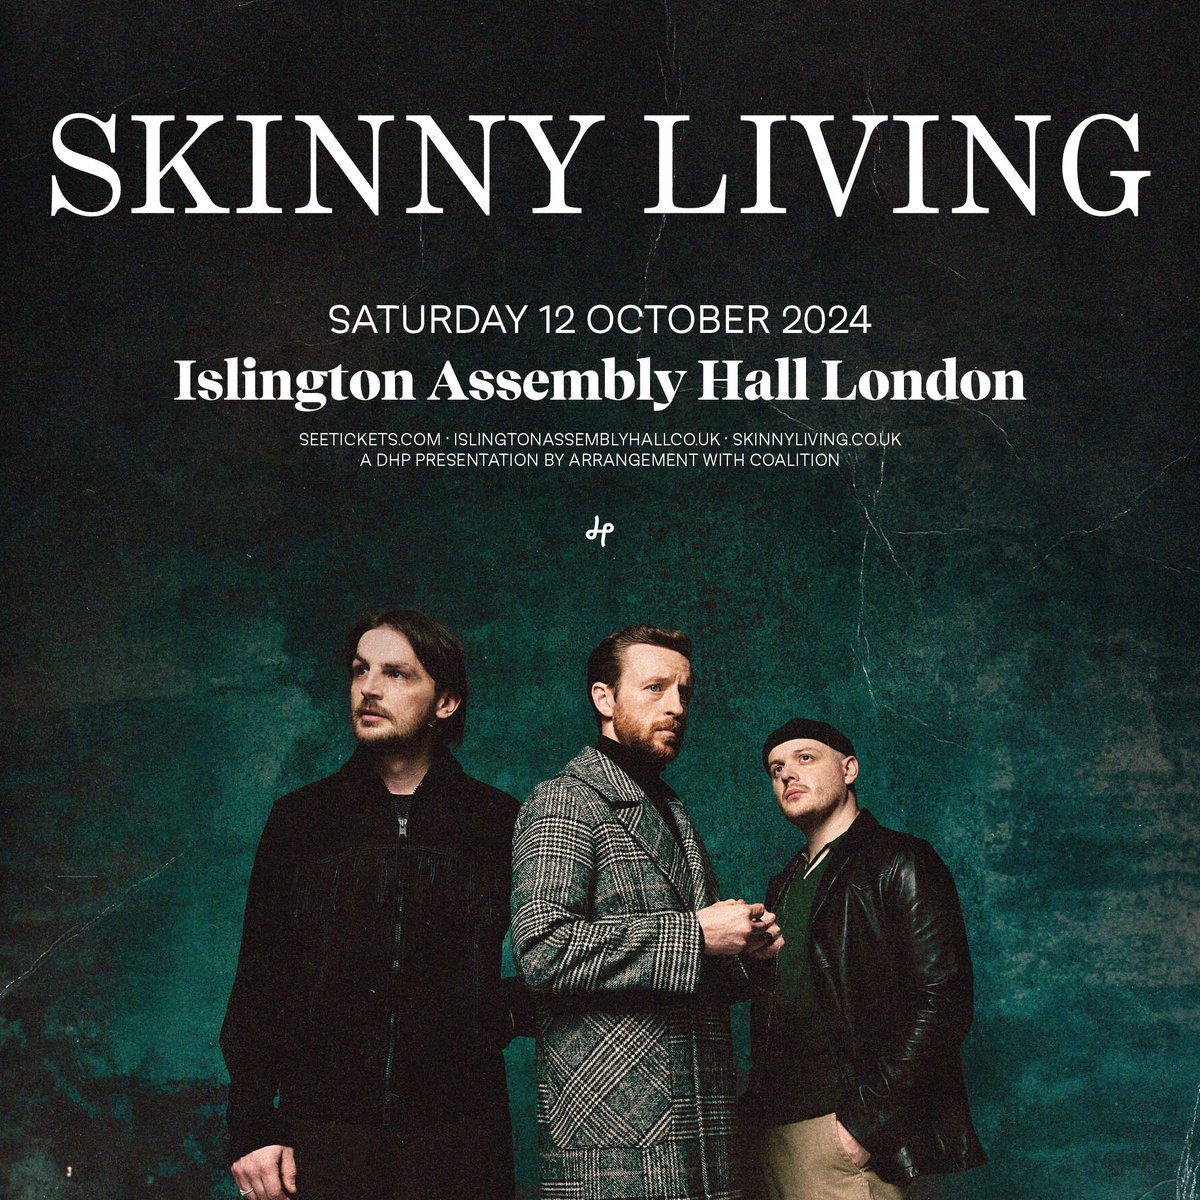 Known for their soulful blend of acoustic pop and folk, @skinnylivinguk have just announced a show at London’s Islington Assembly Hall on Saturday 12th October! Tickets are on sale Friday 24th May, set a reminder now: tinyurl.com/2em7ke6h